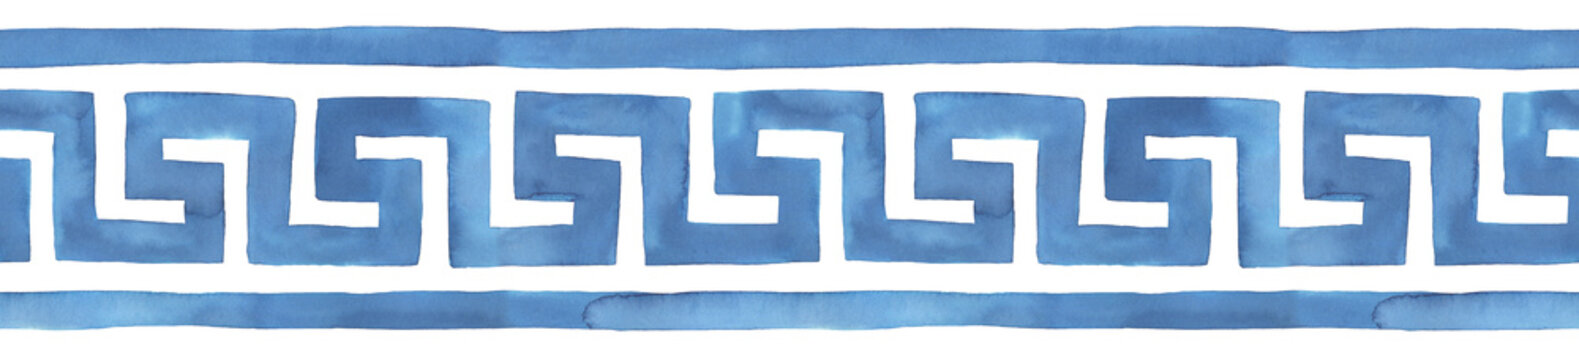 Seamless repeatable border of stylized Greek Key (Meander) pattern in blue colour with artistic stains and brush strokes. Hand painted watercolor illustration on white, isolated element for design.